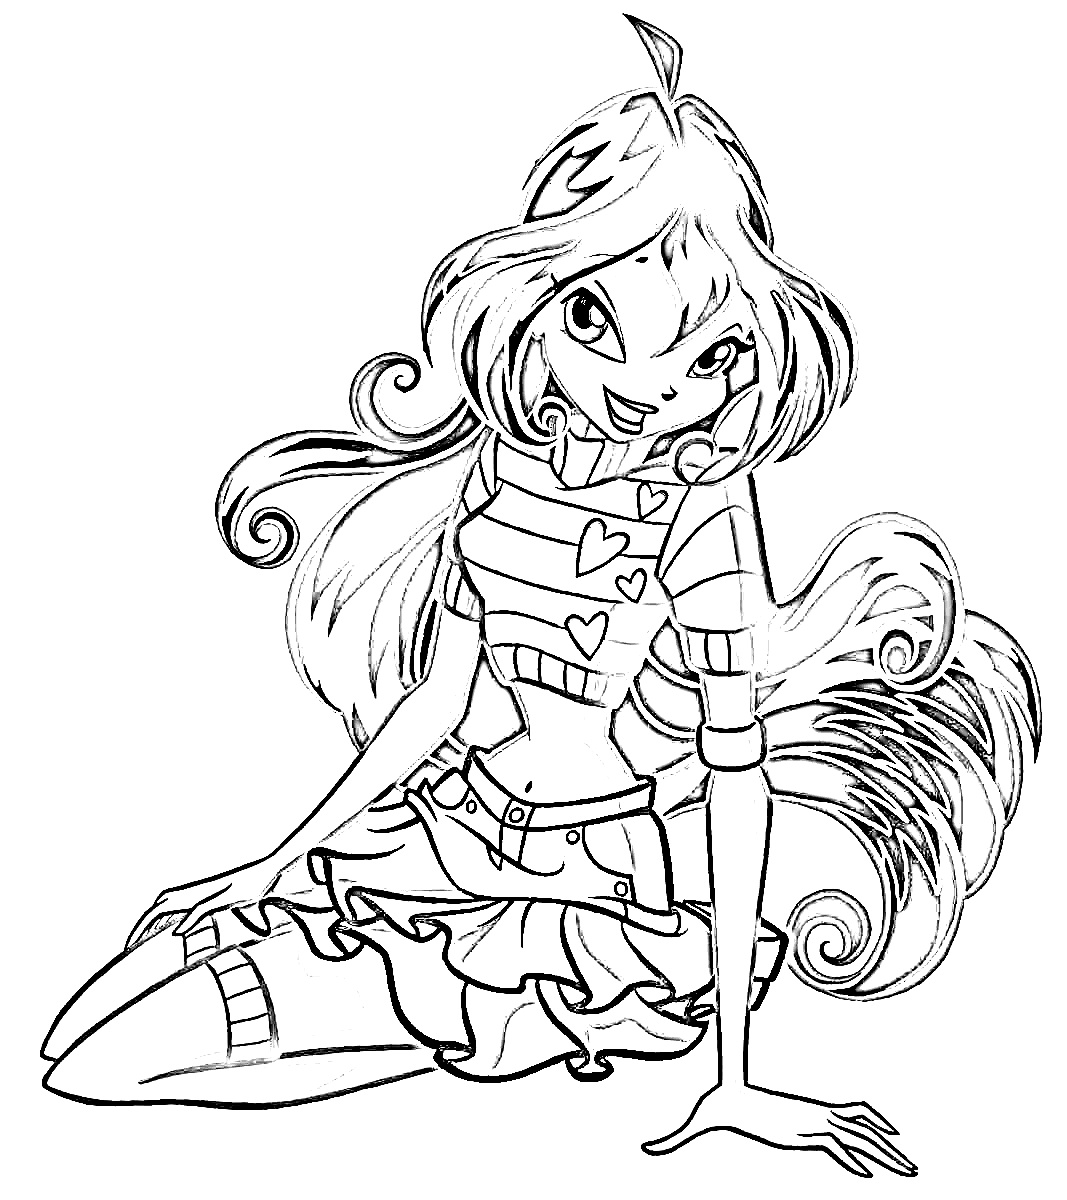 Download Winx free to color for children - Winx Kids Coloring Pages